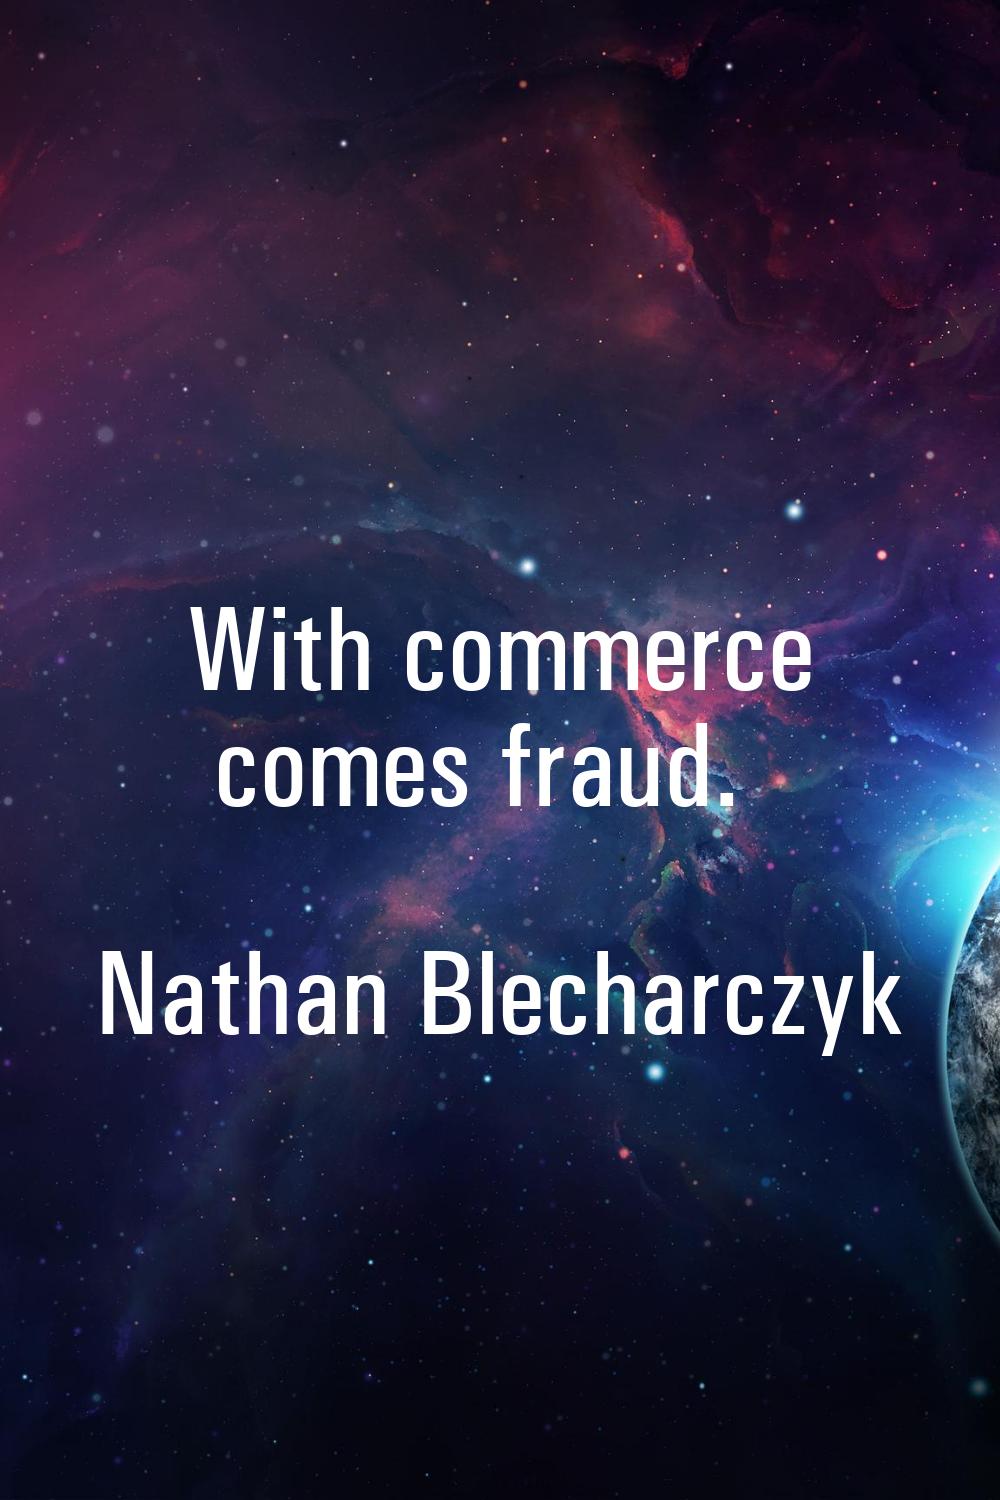 With commerce comes fraud.